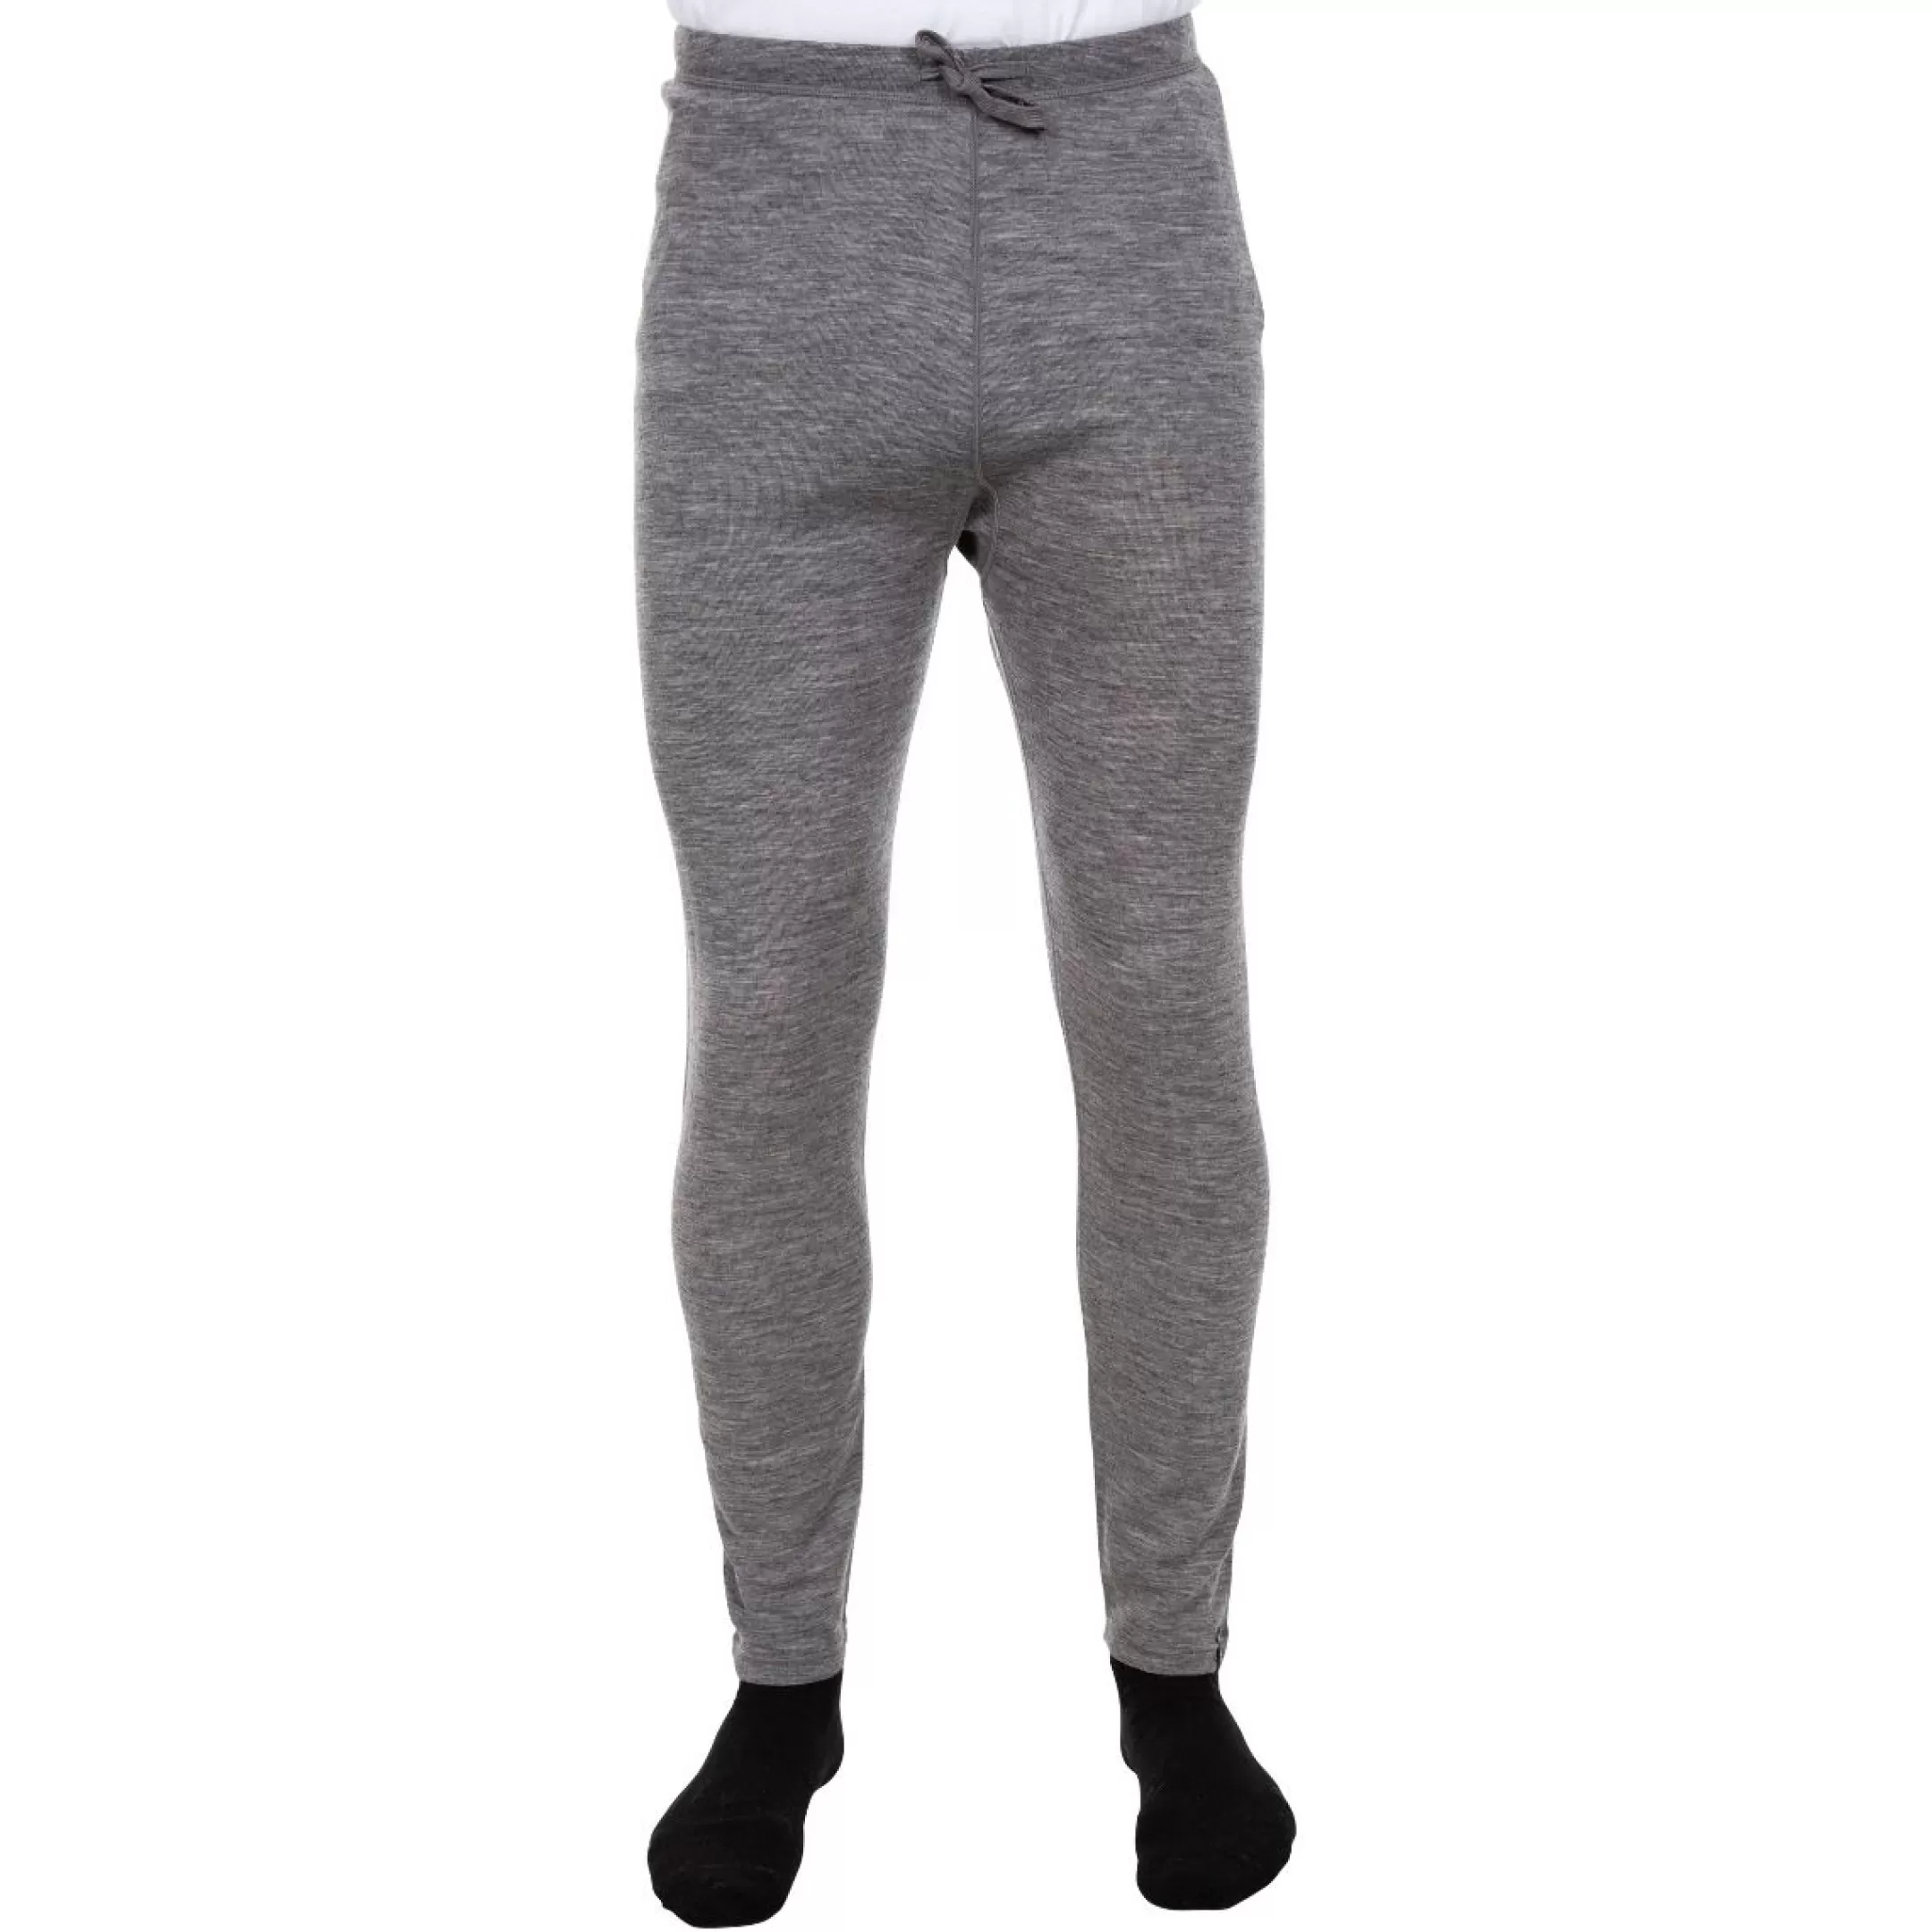 Men's DLX Merino Wool Thermal Trousers Fitchner | Trespass Sale